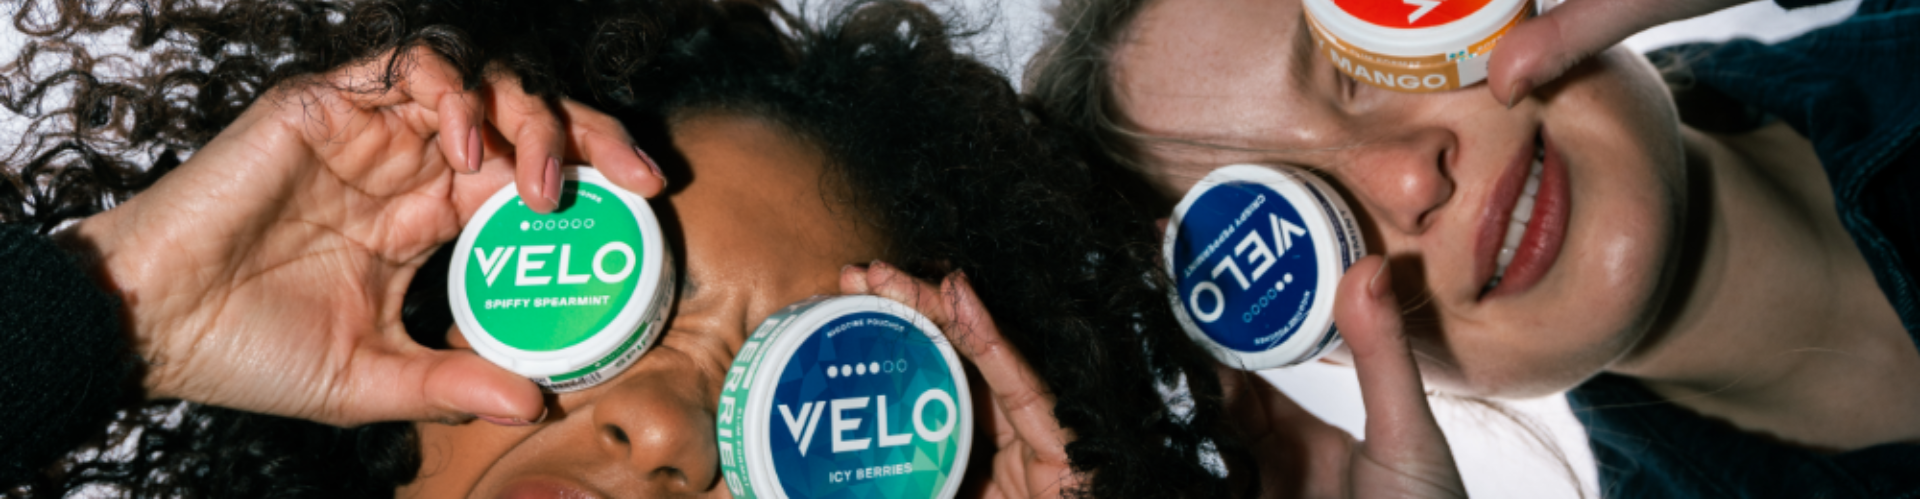 Two people choose VELO nicotine pouches from the many flavours available